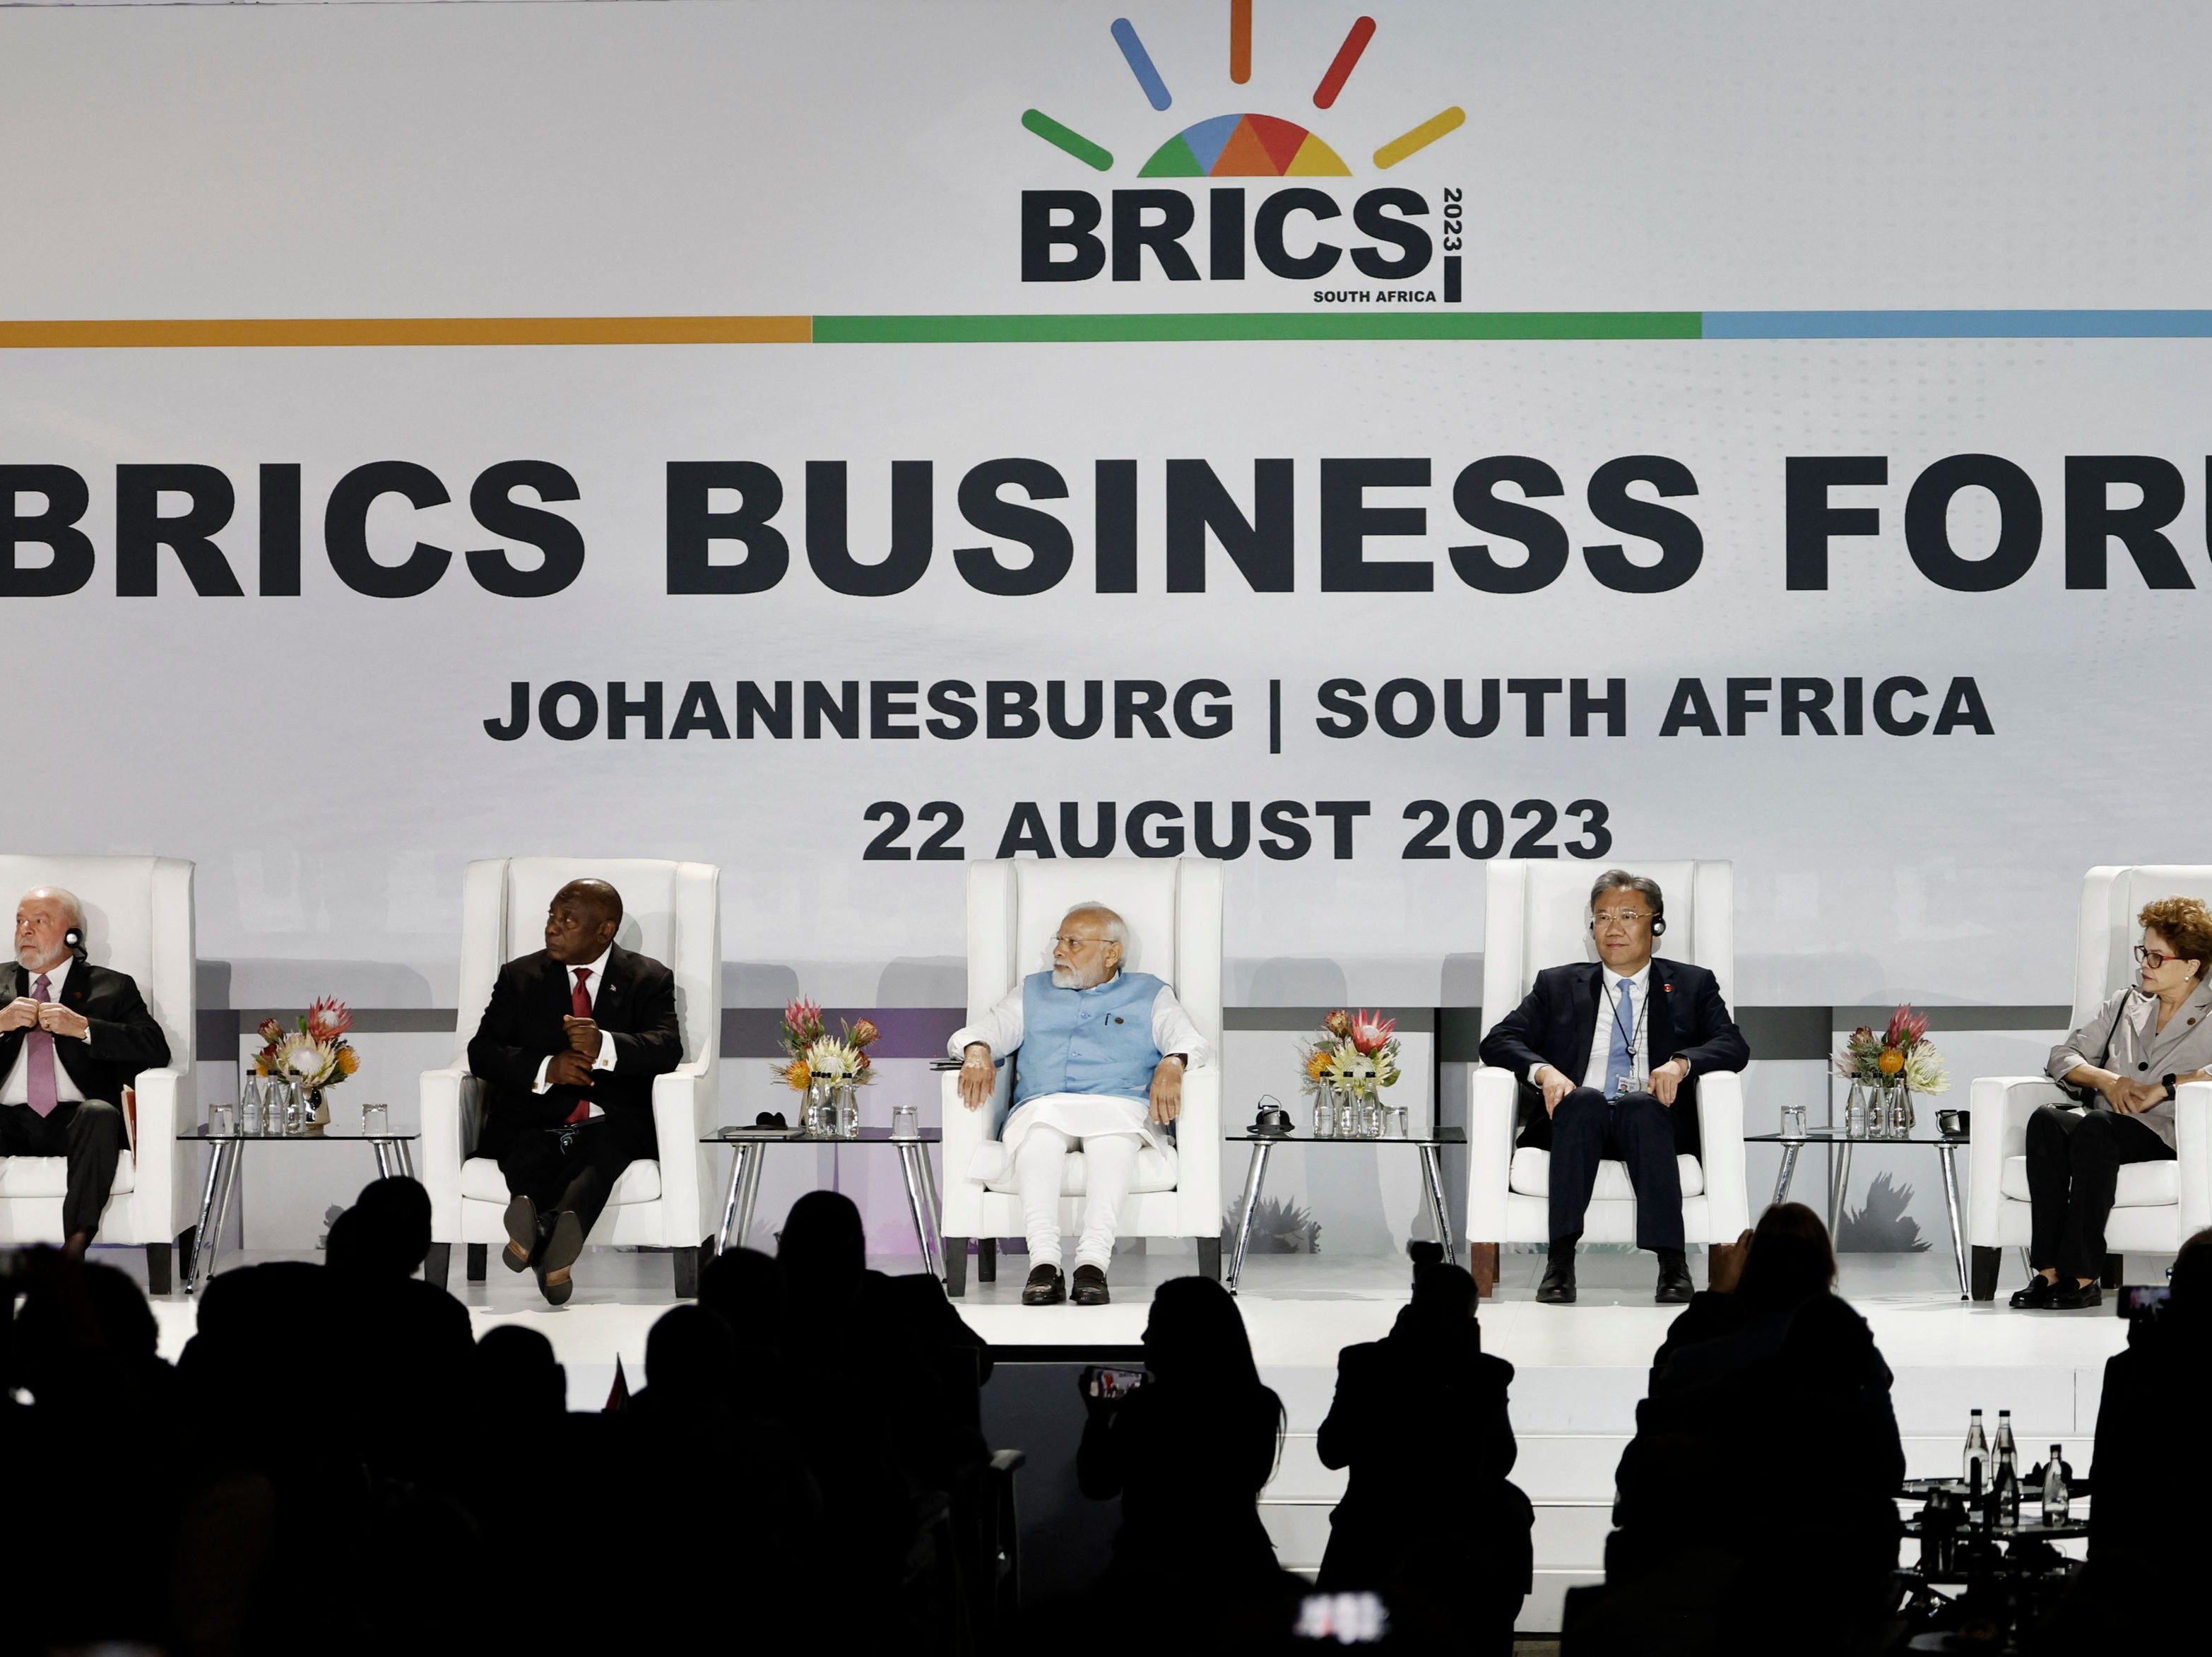 President of Brazil Luiz Inacio Lula da Silva, South African President Cyril Ramaphosa, Prime Minister of India Narendra Modi and China’s Minister of Commerce Wang Wentao attend the 2023 Brics Summit